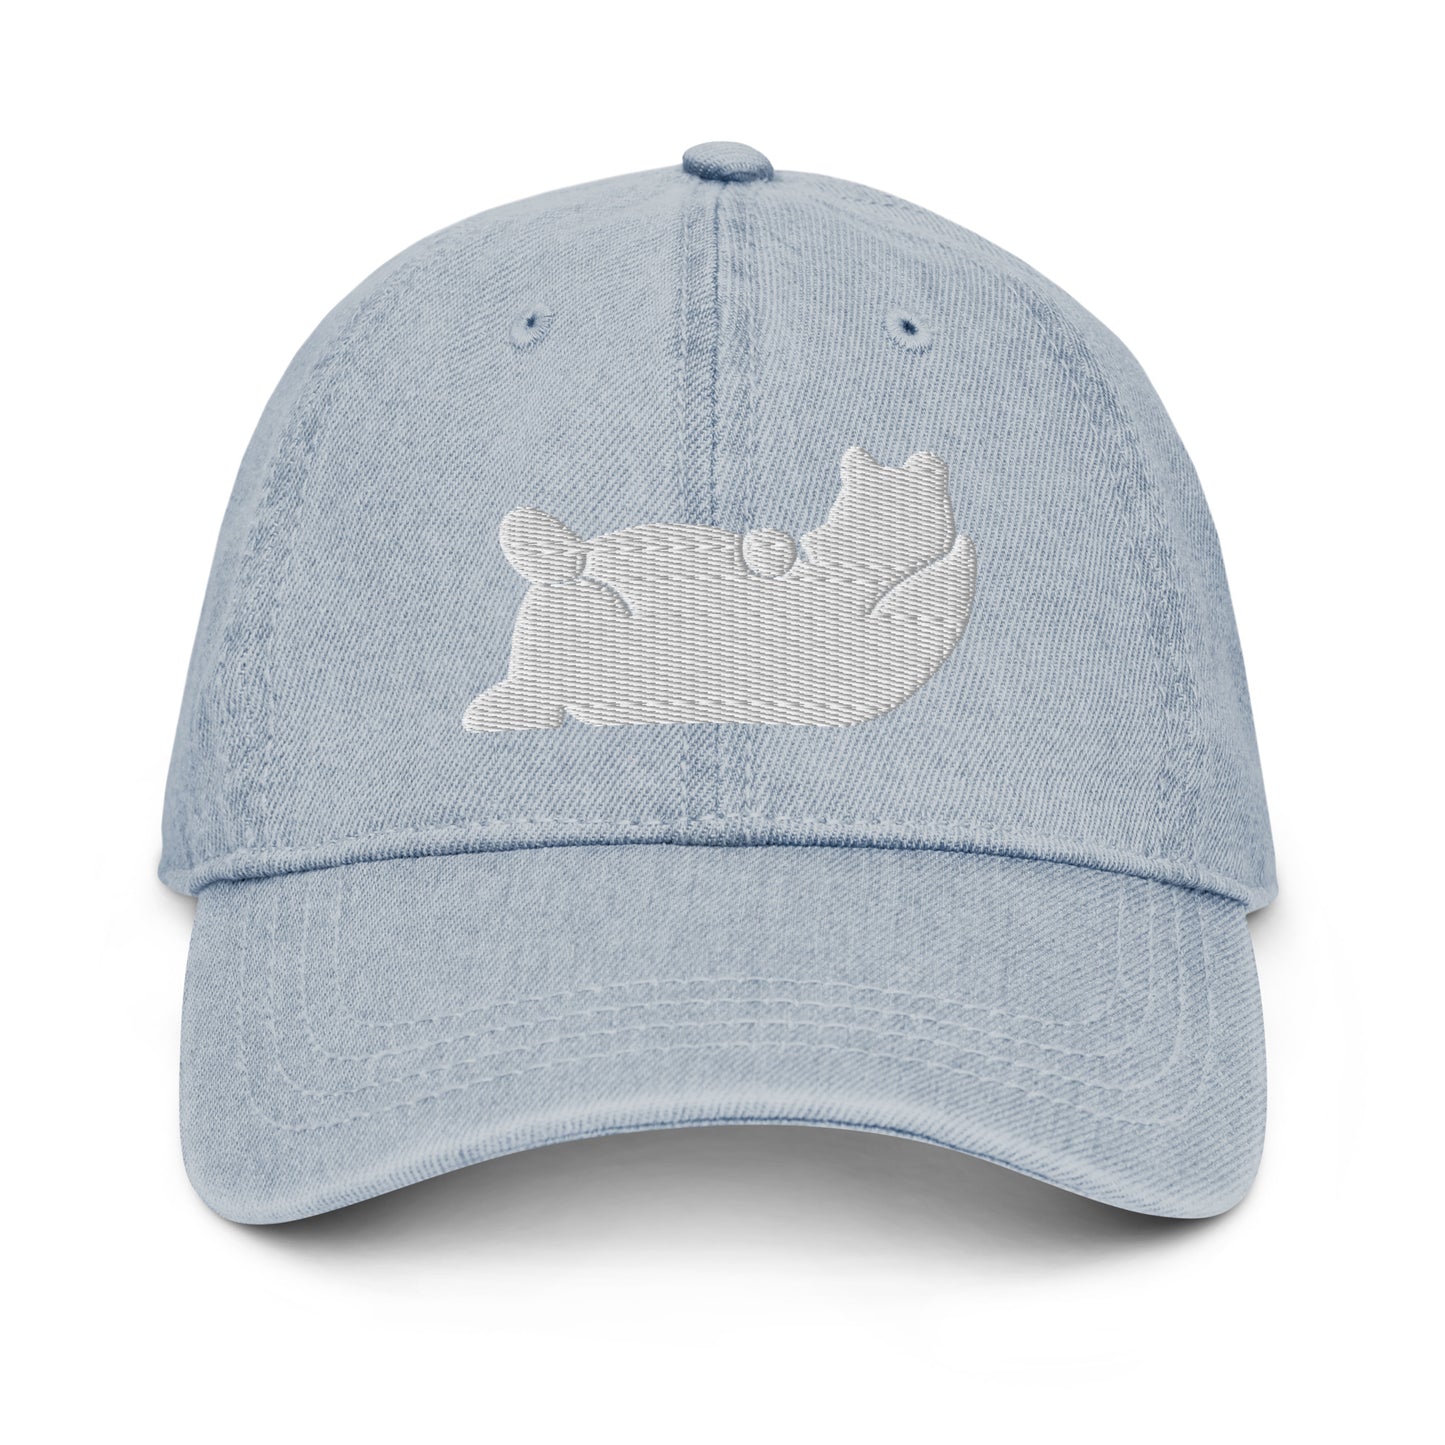 Lazy Bear Outfitters' Branded Denim Hat